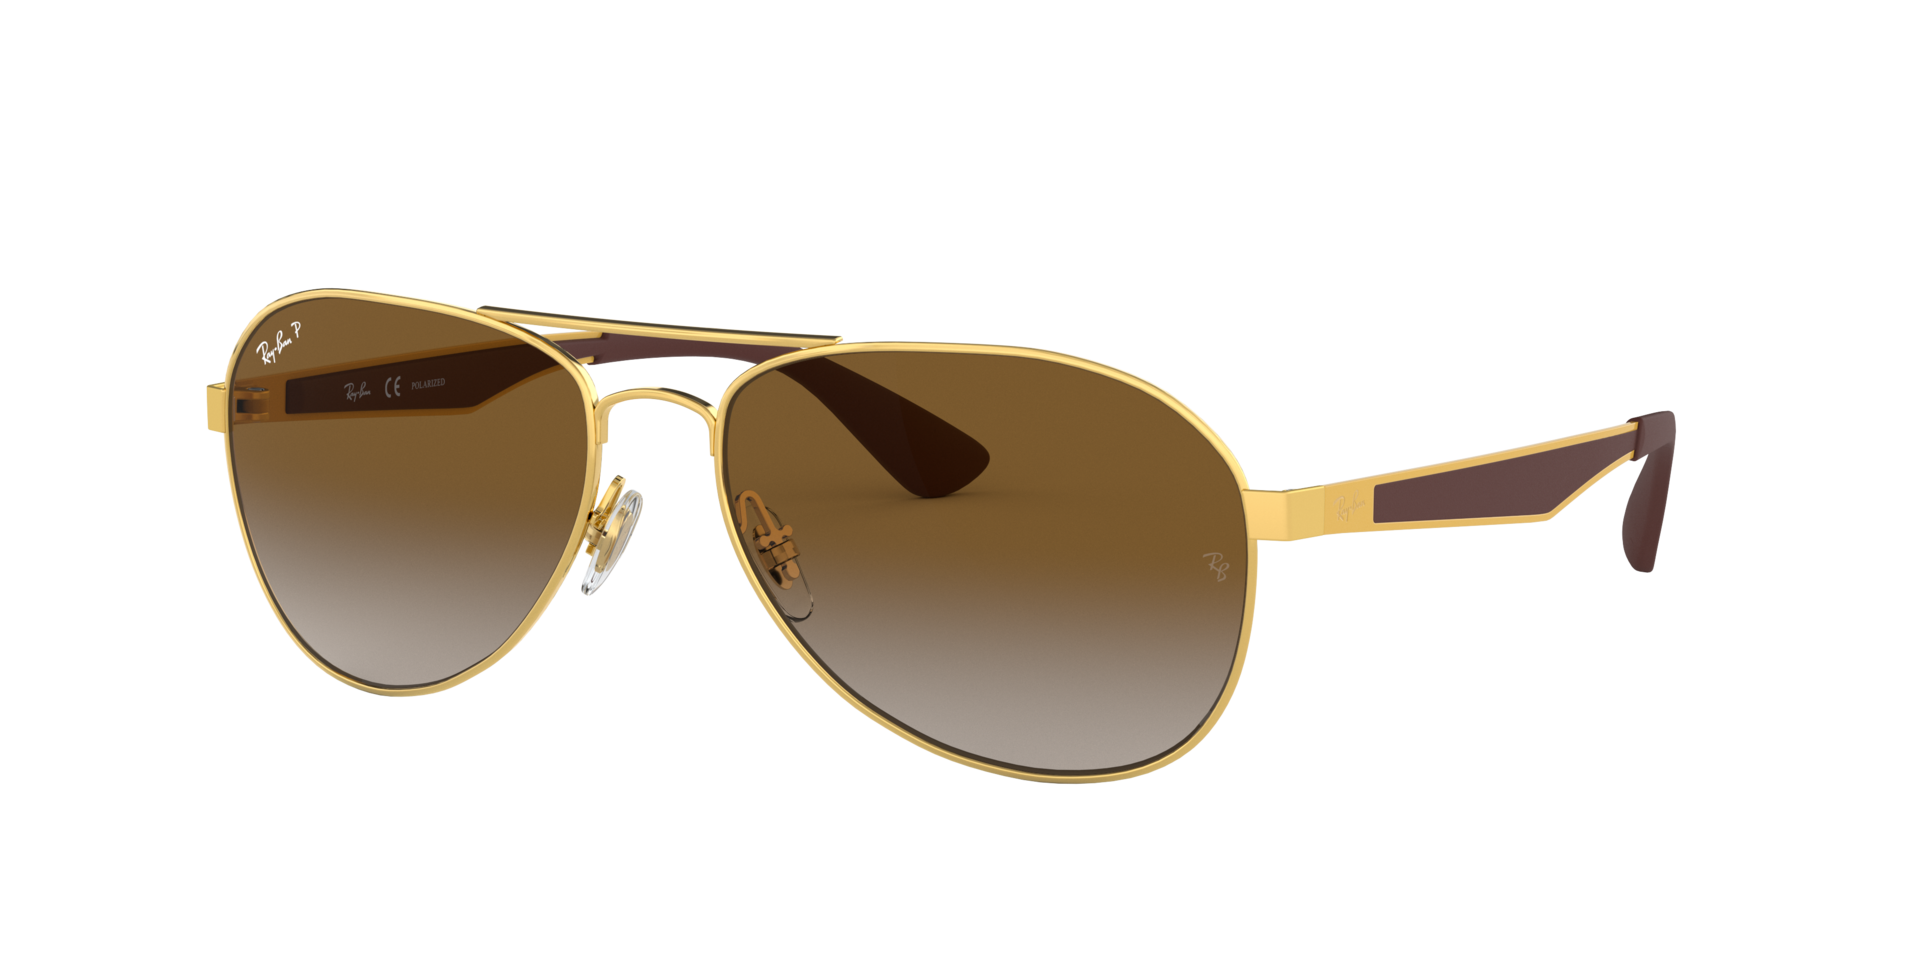 Buy Ray-Ban Rb3549 Sunglasses Online.